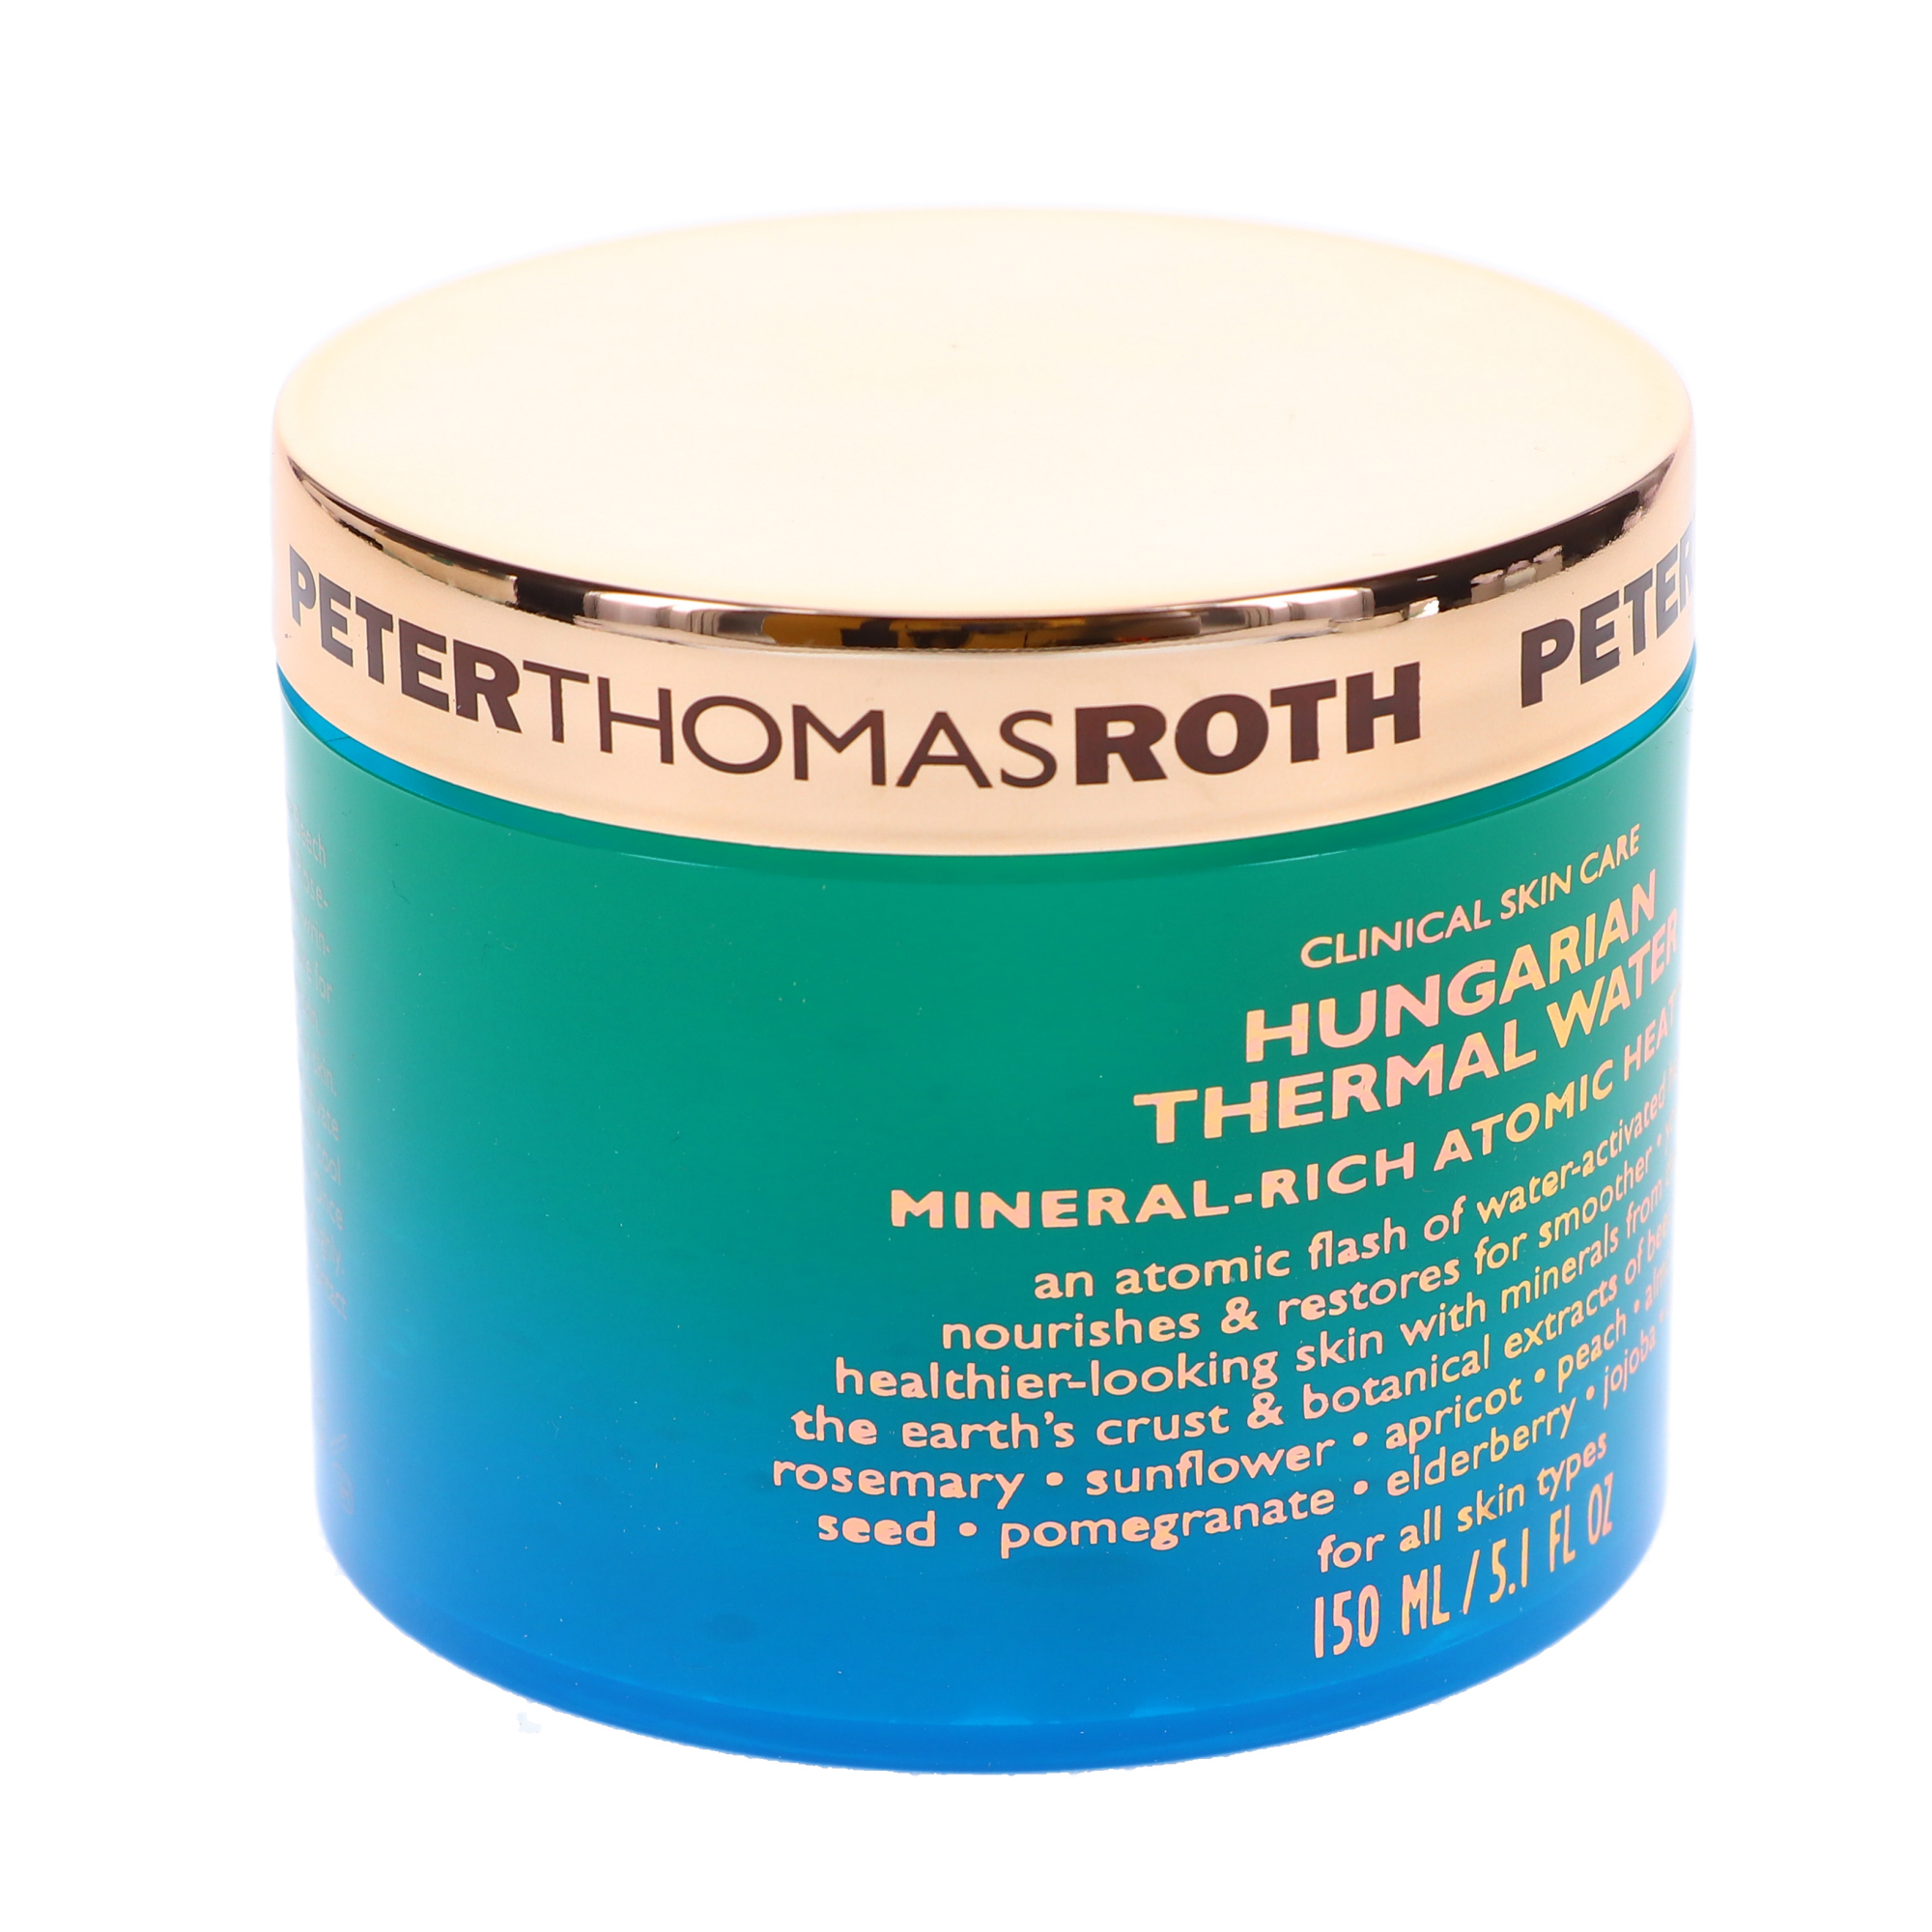 Peter Thomas Roth Hungarian Thermal Water Mineral Rich Atomic Heat Mask 5.1 oz - image 6 of 8